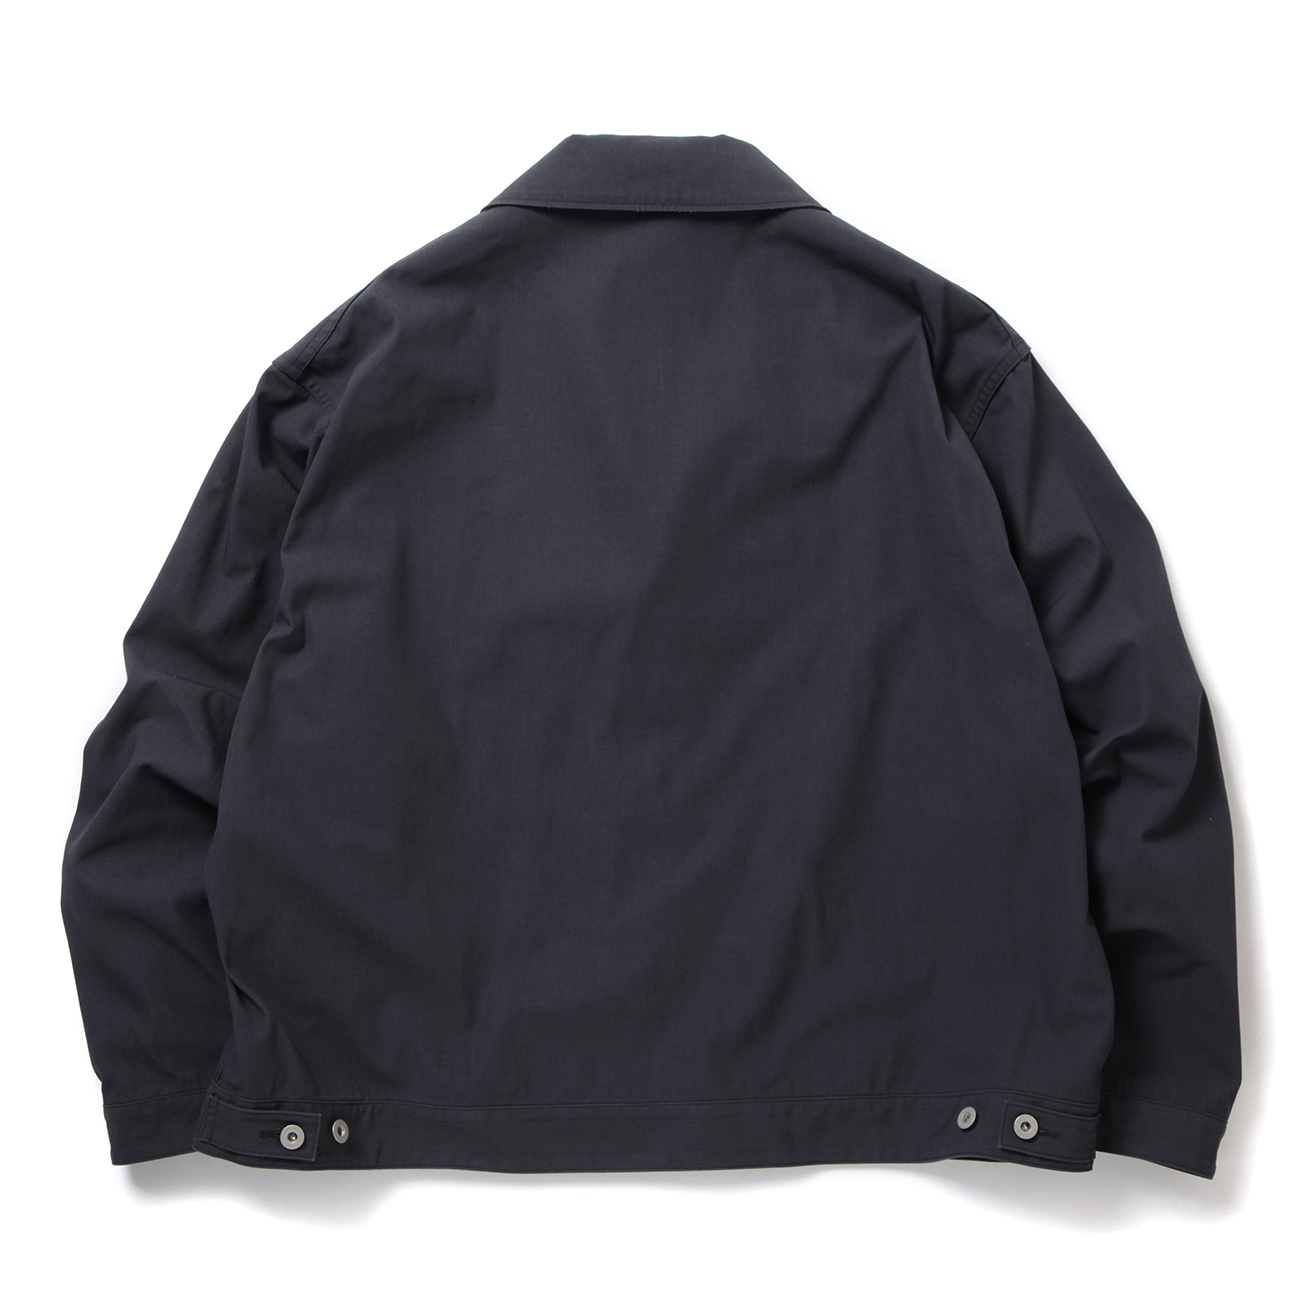 Y / ワイ (YLEVE / イレーヴ) | ORGANIC COTTON / RECYCLE POLYESTER TWILL BZ - Navy  | 通販 - 正規取扱店 | COLLECT STORE / コレクトストア